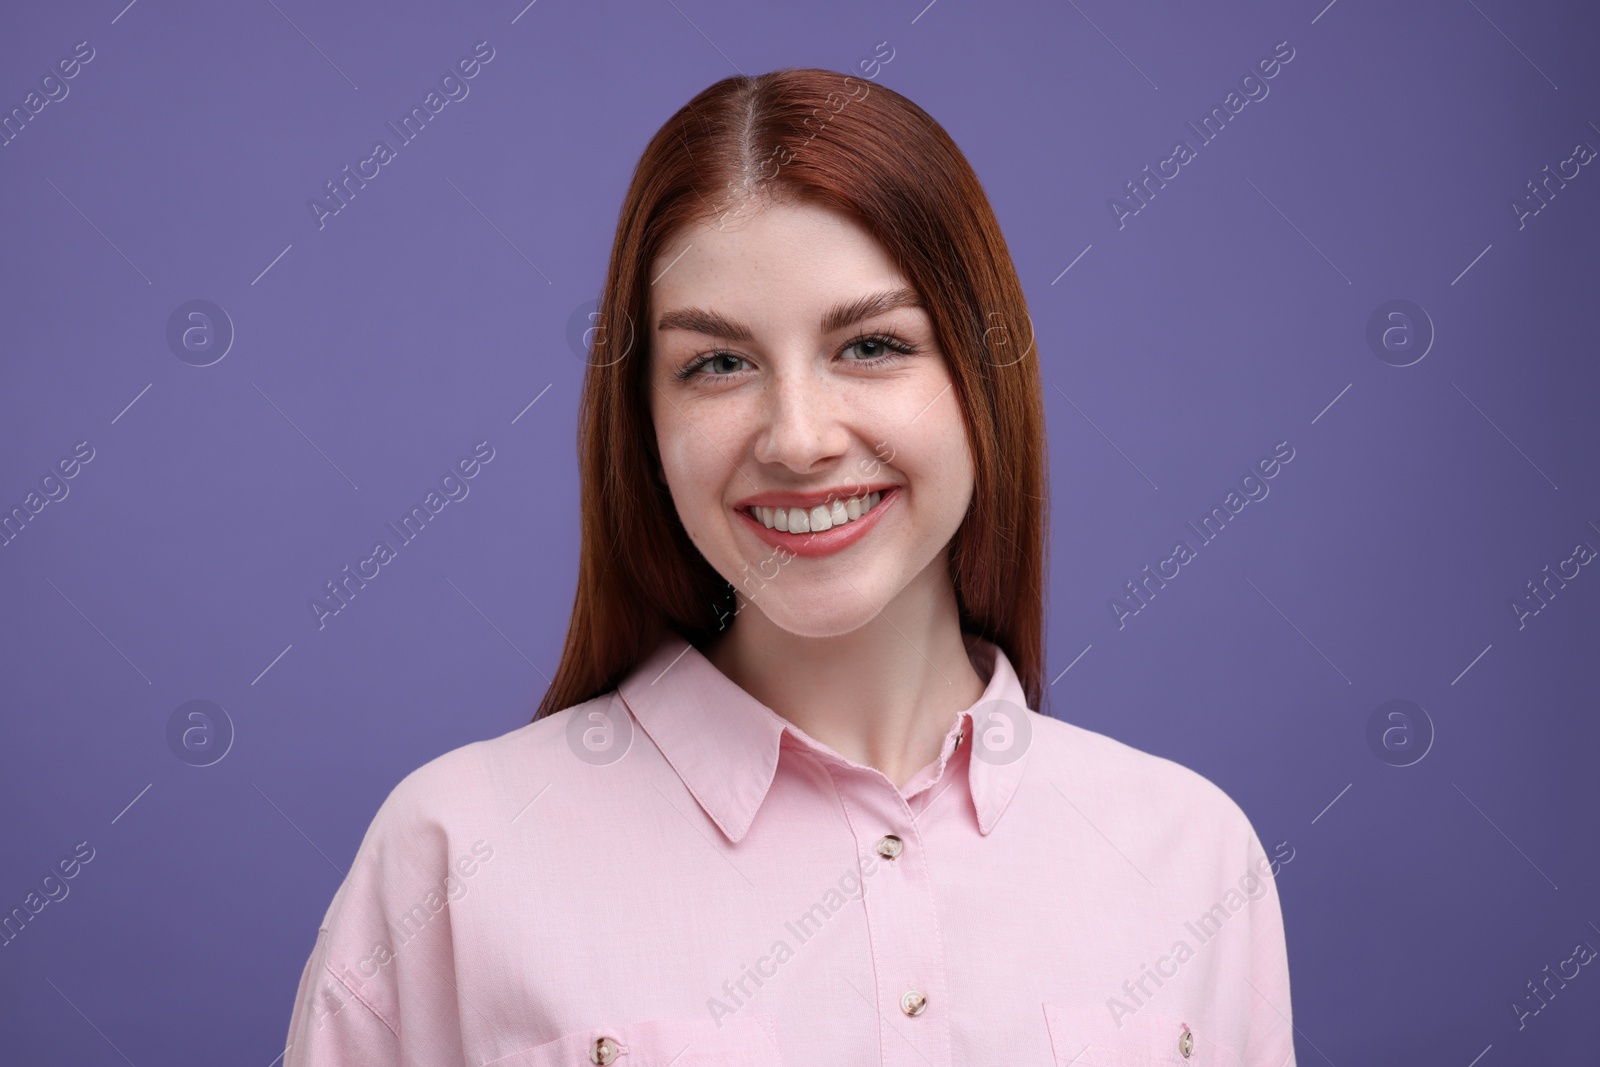 Photo of Portrait of smiling woman with freckles on purple background